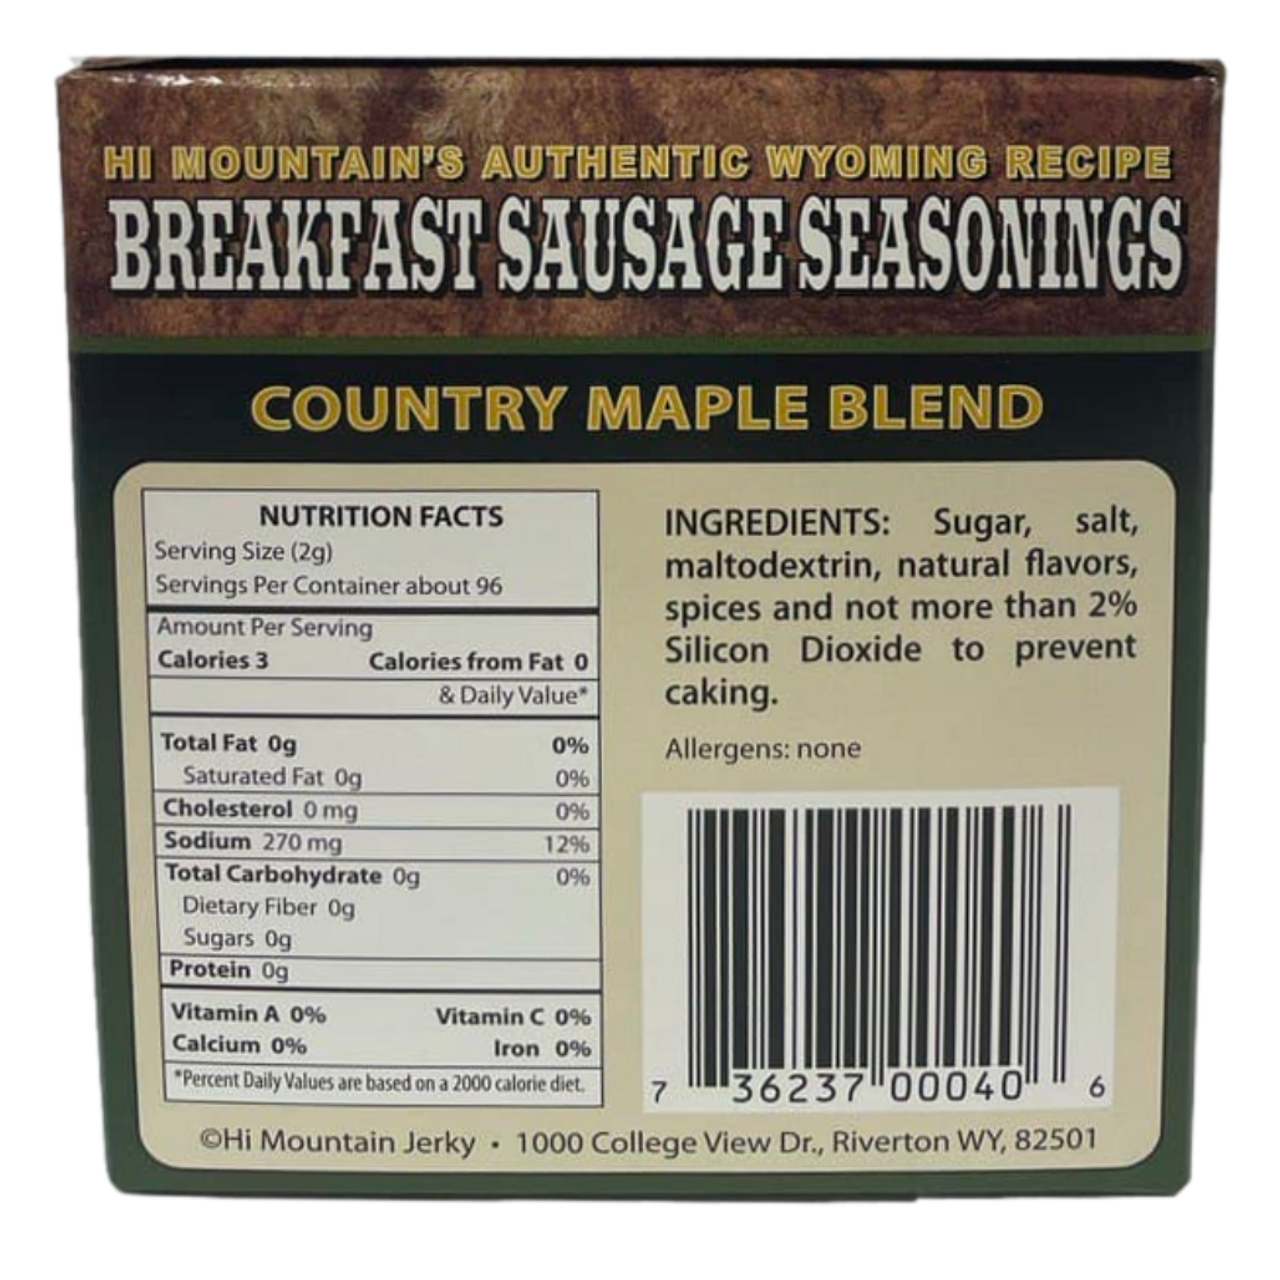 https://cdn11.bigcommerce.com/s-x8y6yj0di0/images/stencil/1280x1280/products/452/980/Hi_Mountain_Breakfast_Sausage_Seasonings_Country_Maple_Blend_side__94533.1659555426.png?c=1